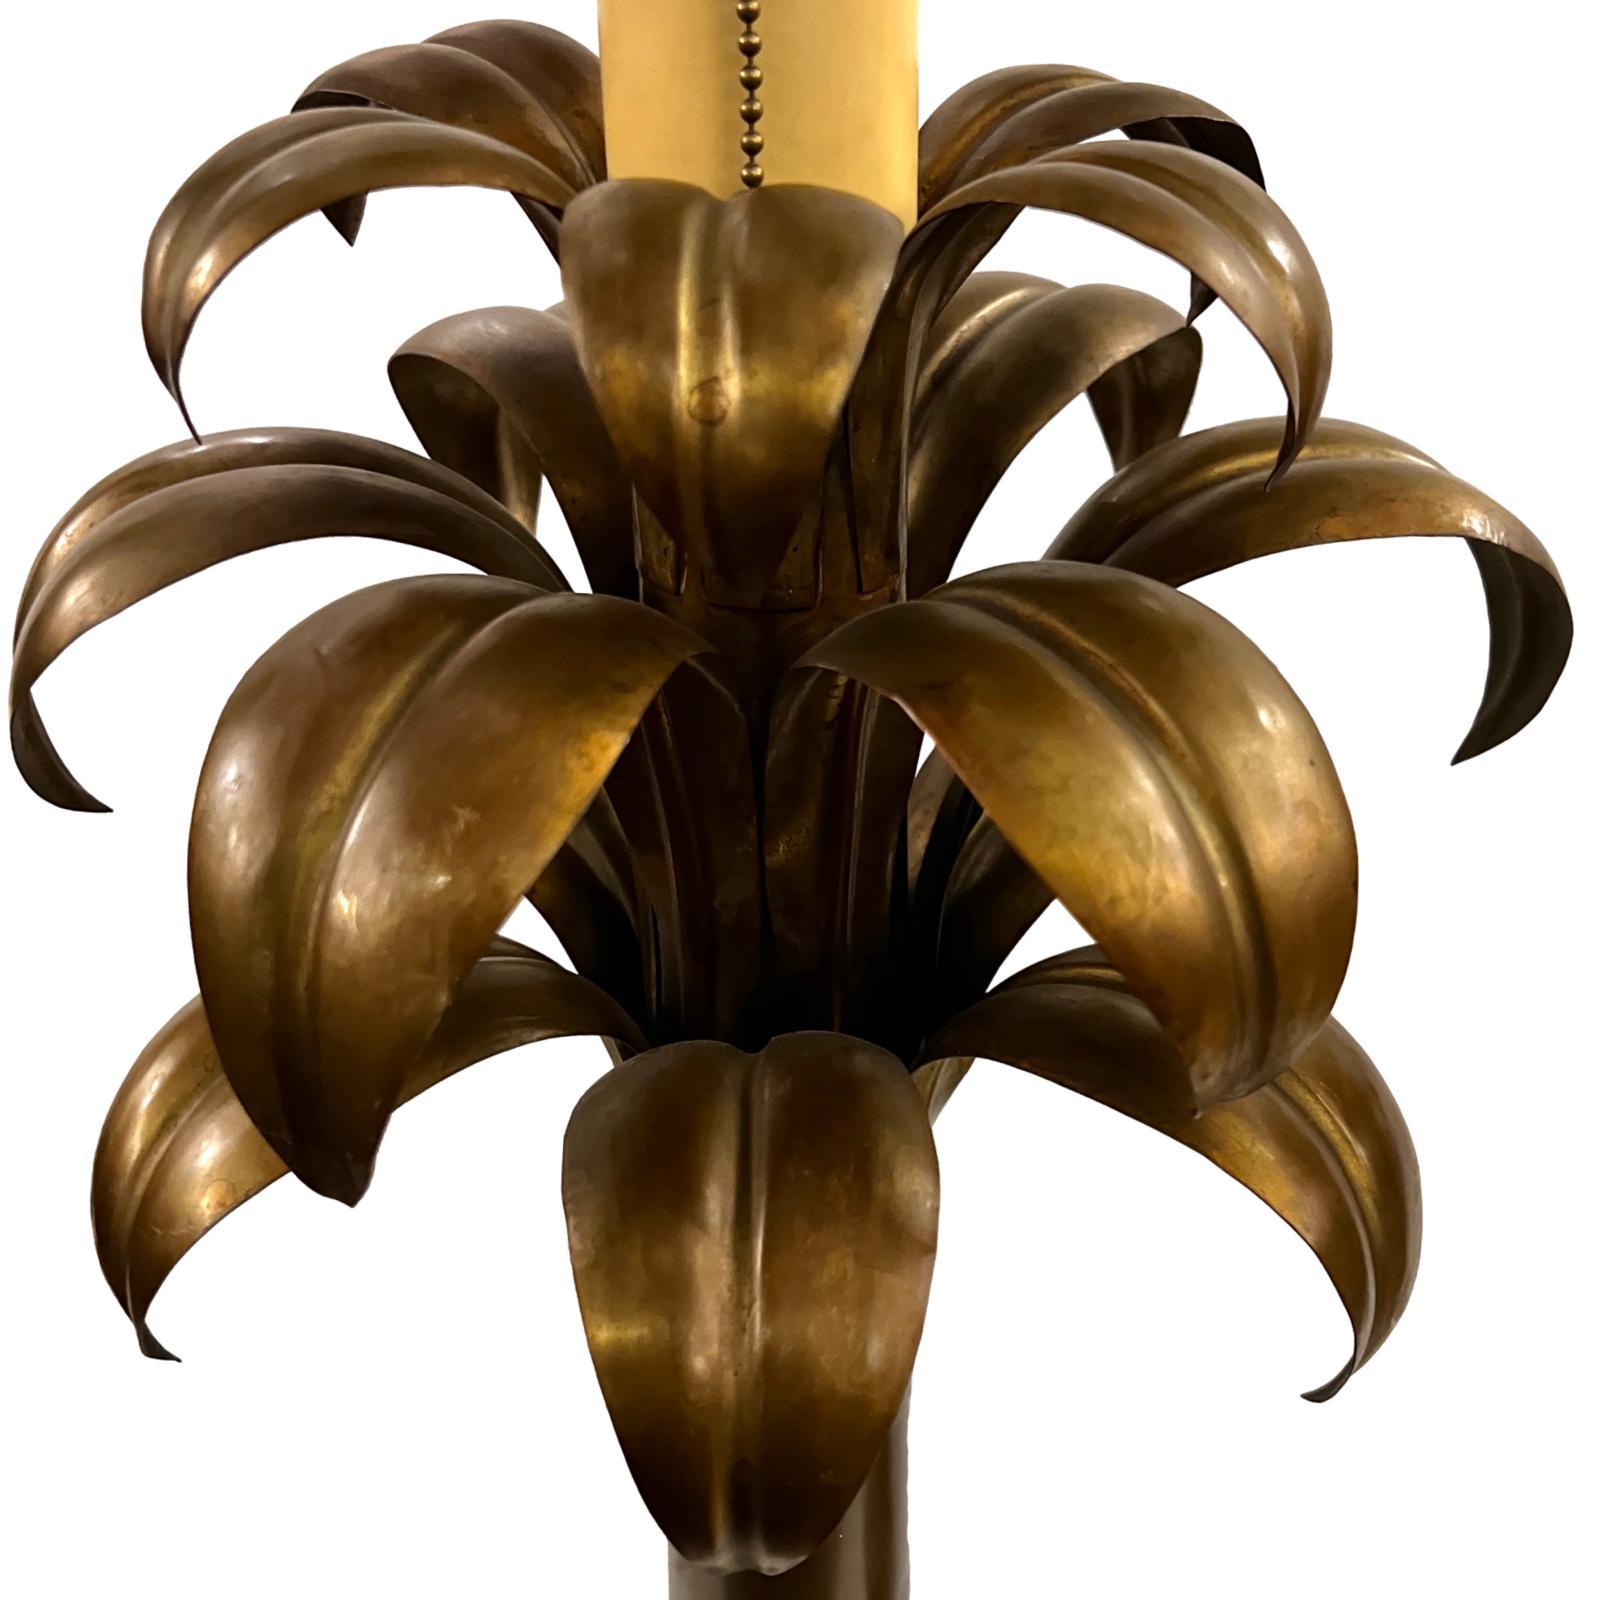 A pair of circa 1950's Italian patinated brass palm tree shaped lamps.

Measurements:
Height of body: 27